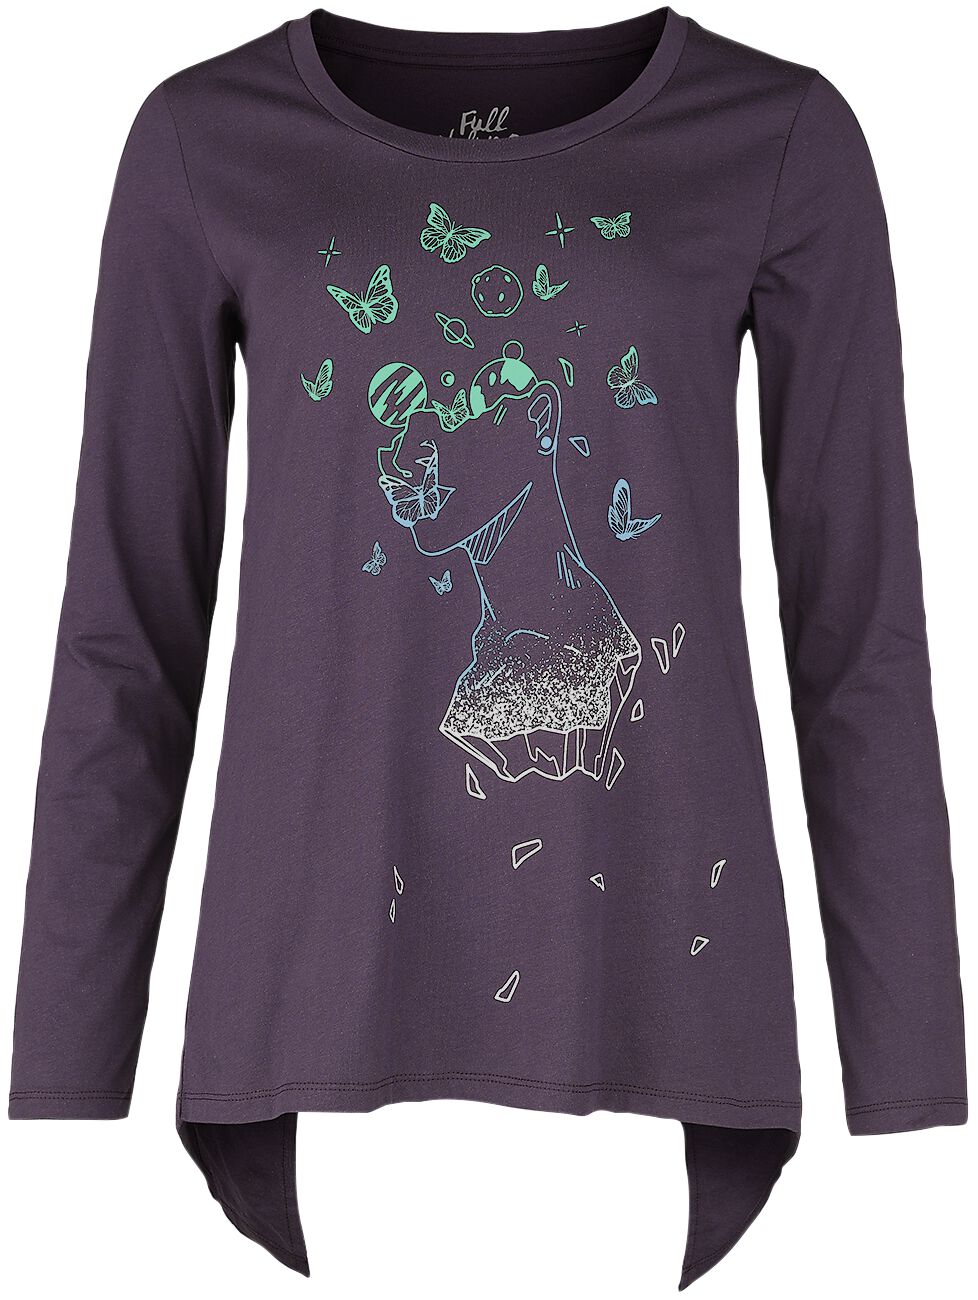 Full Volume by EMP Long-sleeved shirt with galaxy butterfly print Long-sleeve Shirt lilac